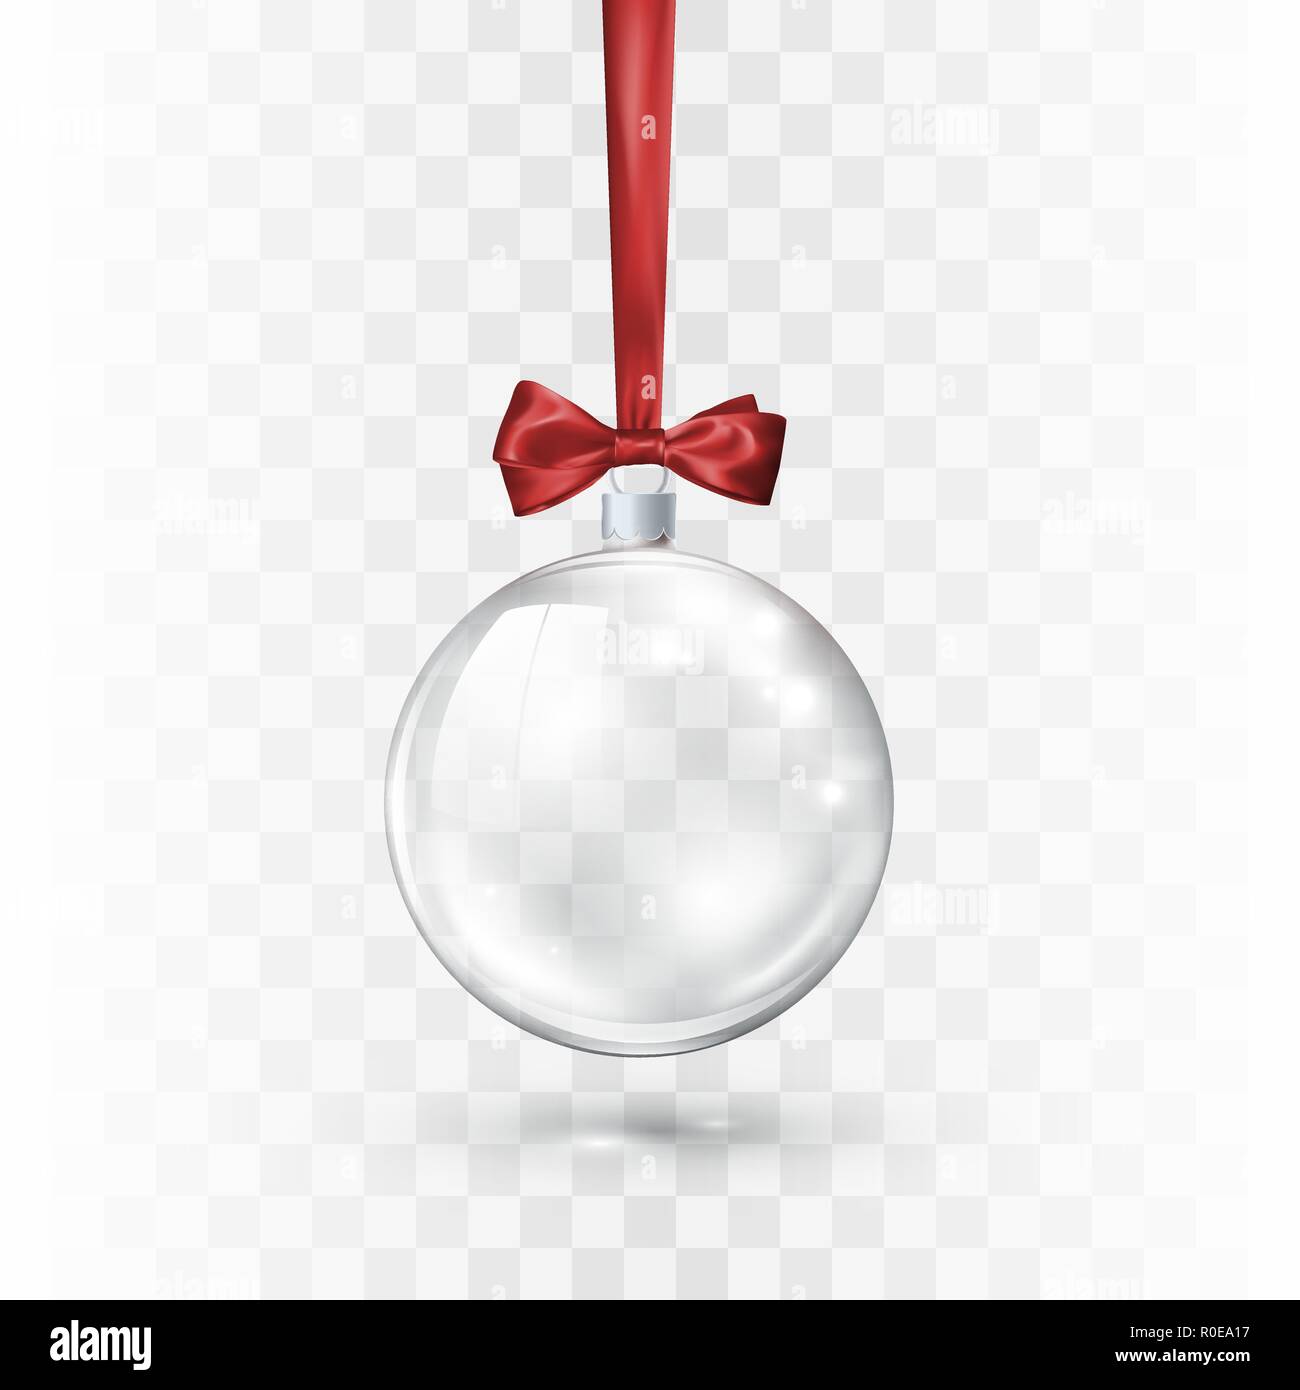 Glass transparent Christmas ball ornate by red bow and ribbon. Element of holiday decoration. Vector illustration isolated on white background Stock Vector